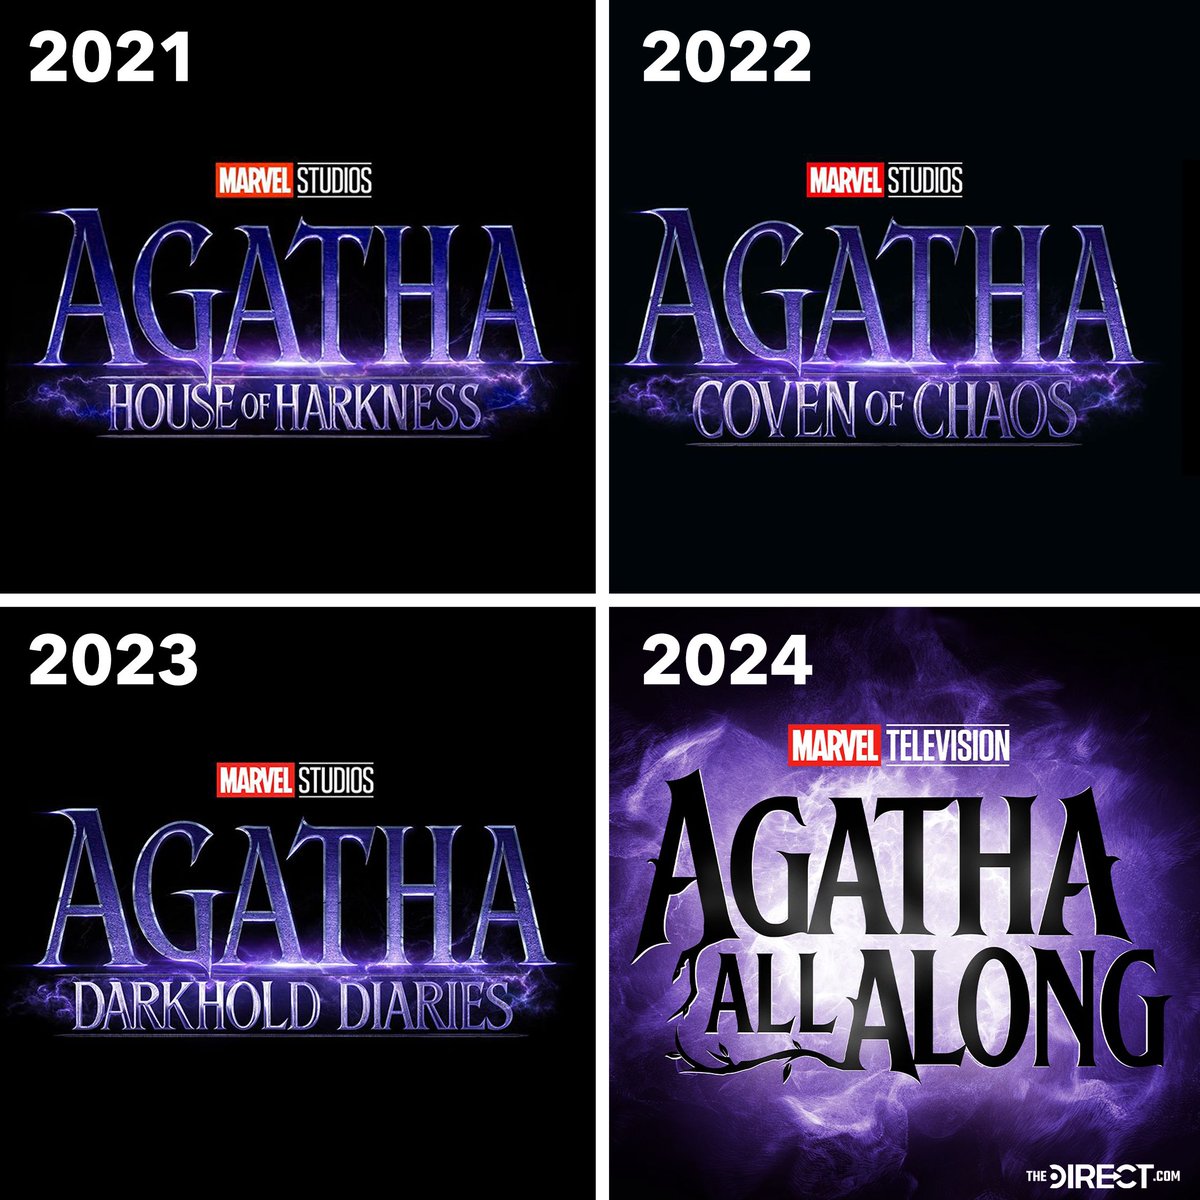 AGATHA ALL ALONG's titles through the years Here's how the series will connect to #WandaVision: thedirect.com/article/wandav…